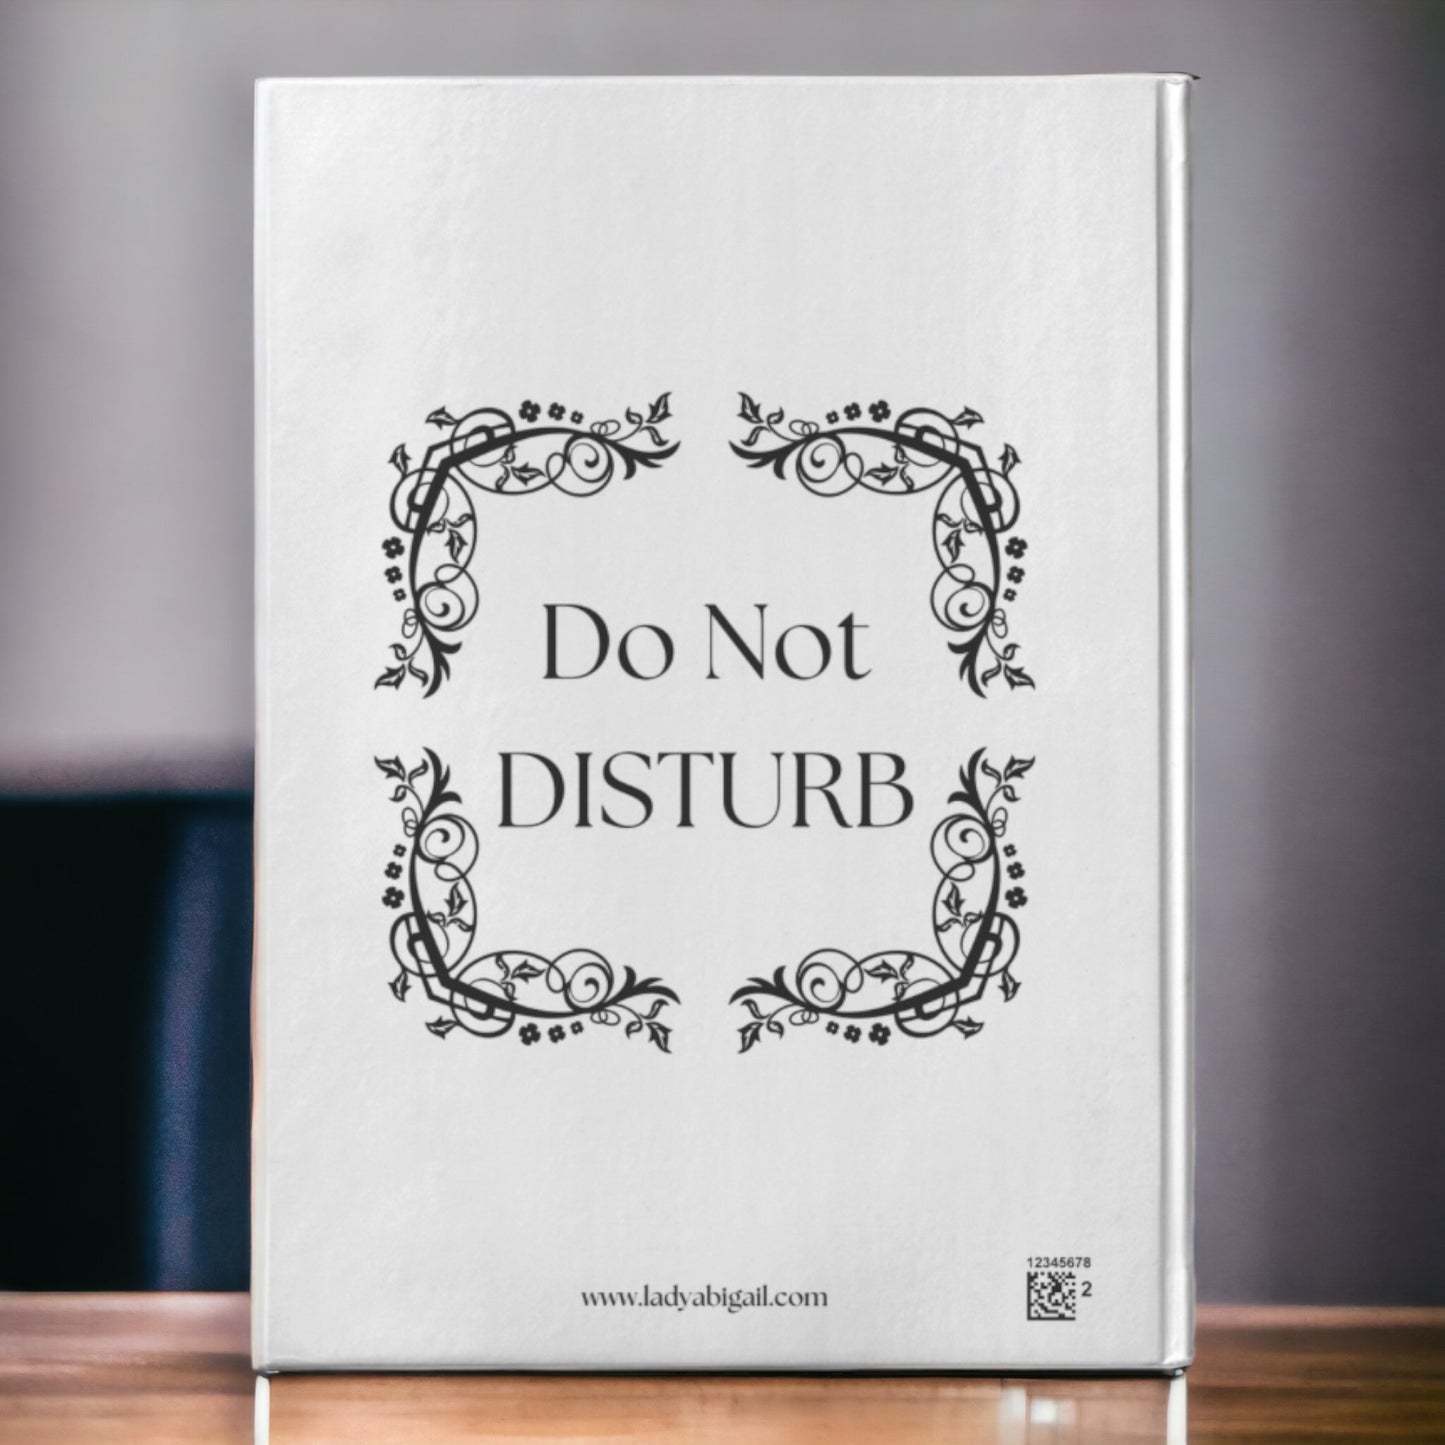 TimeOut Accessories - Do Not Disturb - Hardcover Journal